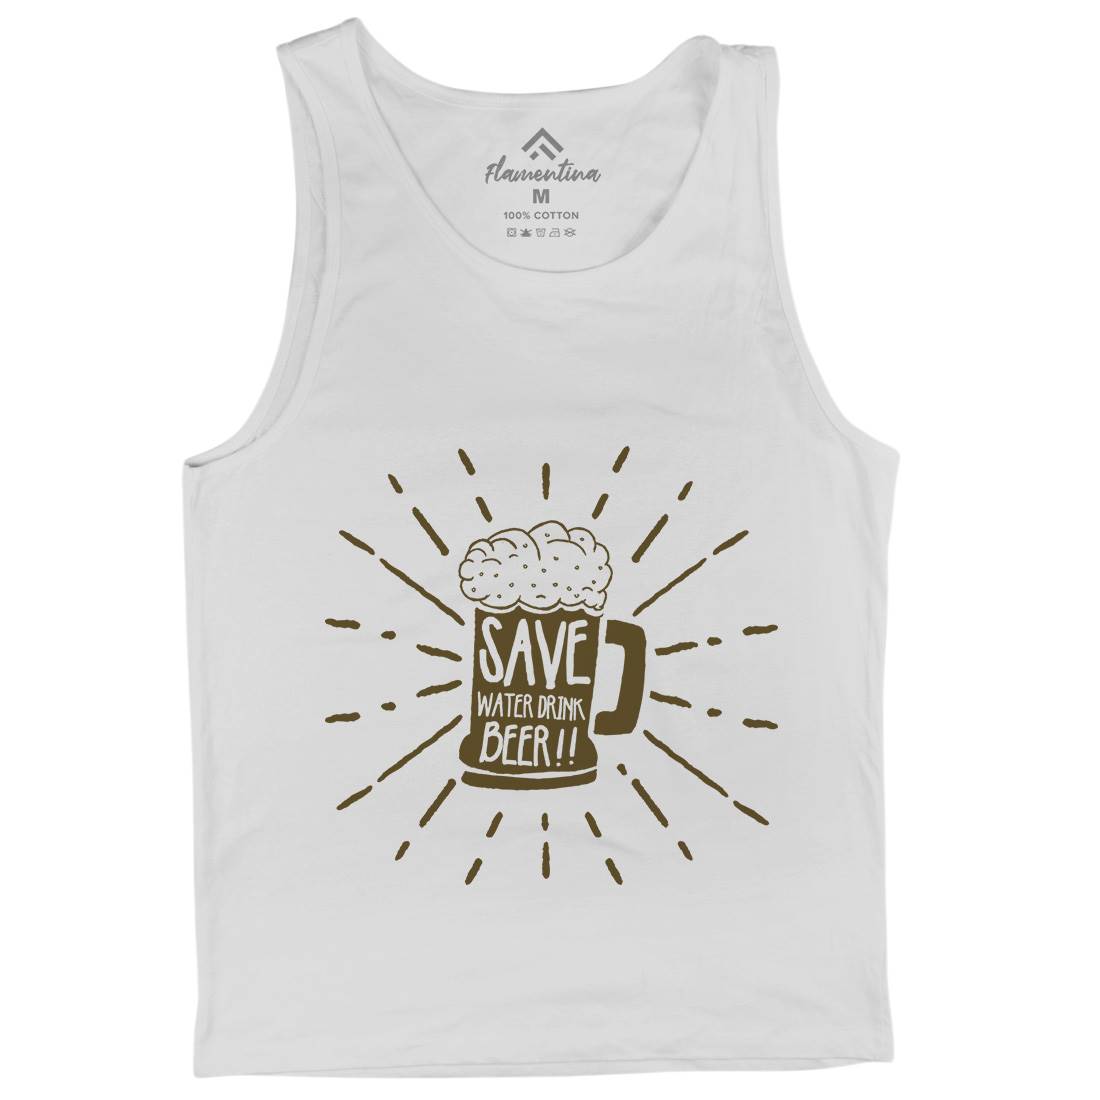 Save Water Mens Tank Top Vest Drinks A368